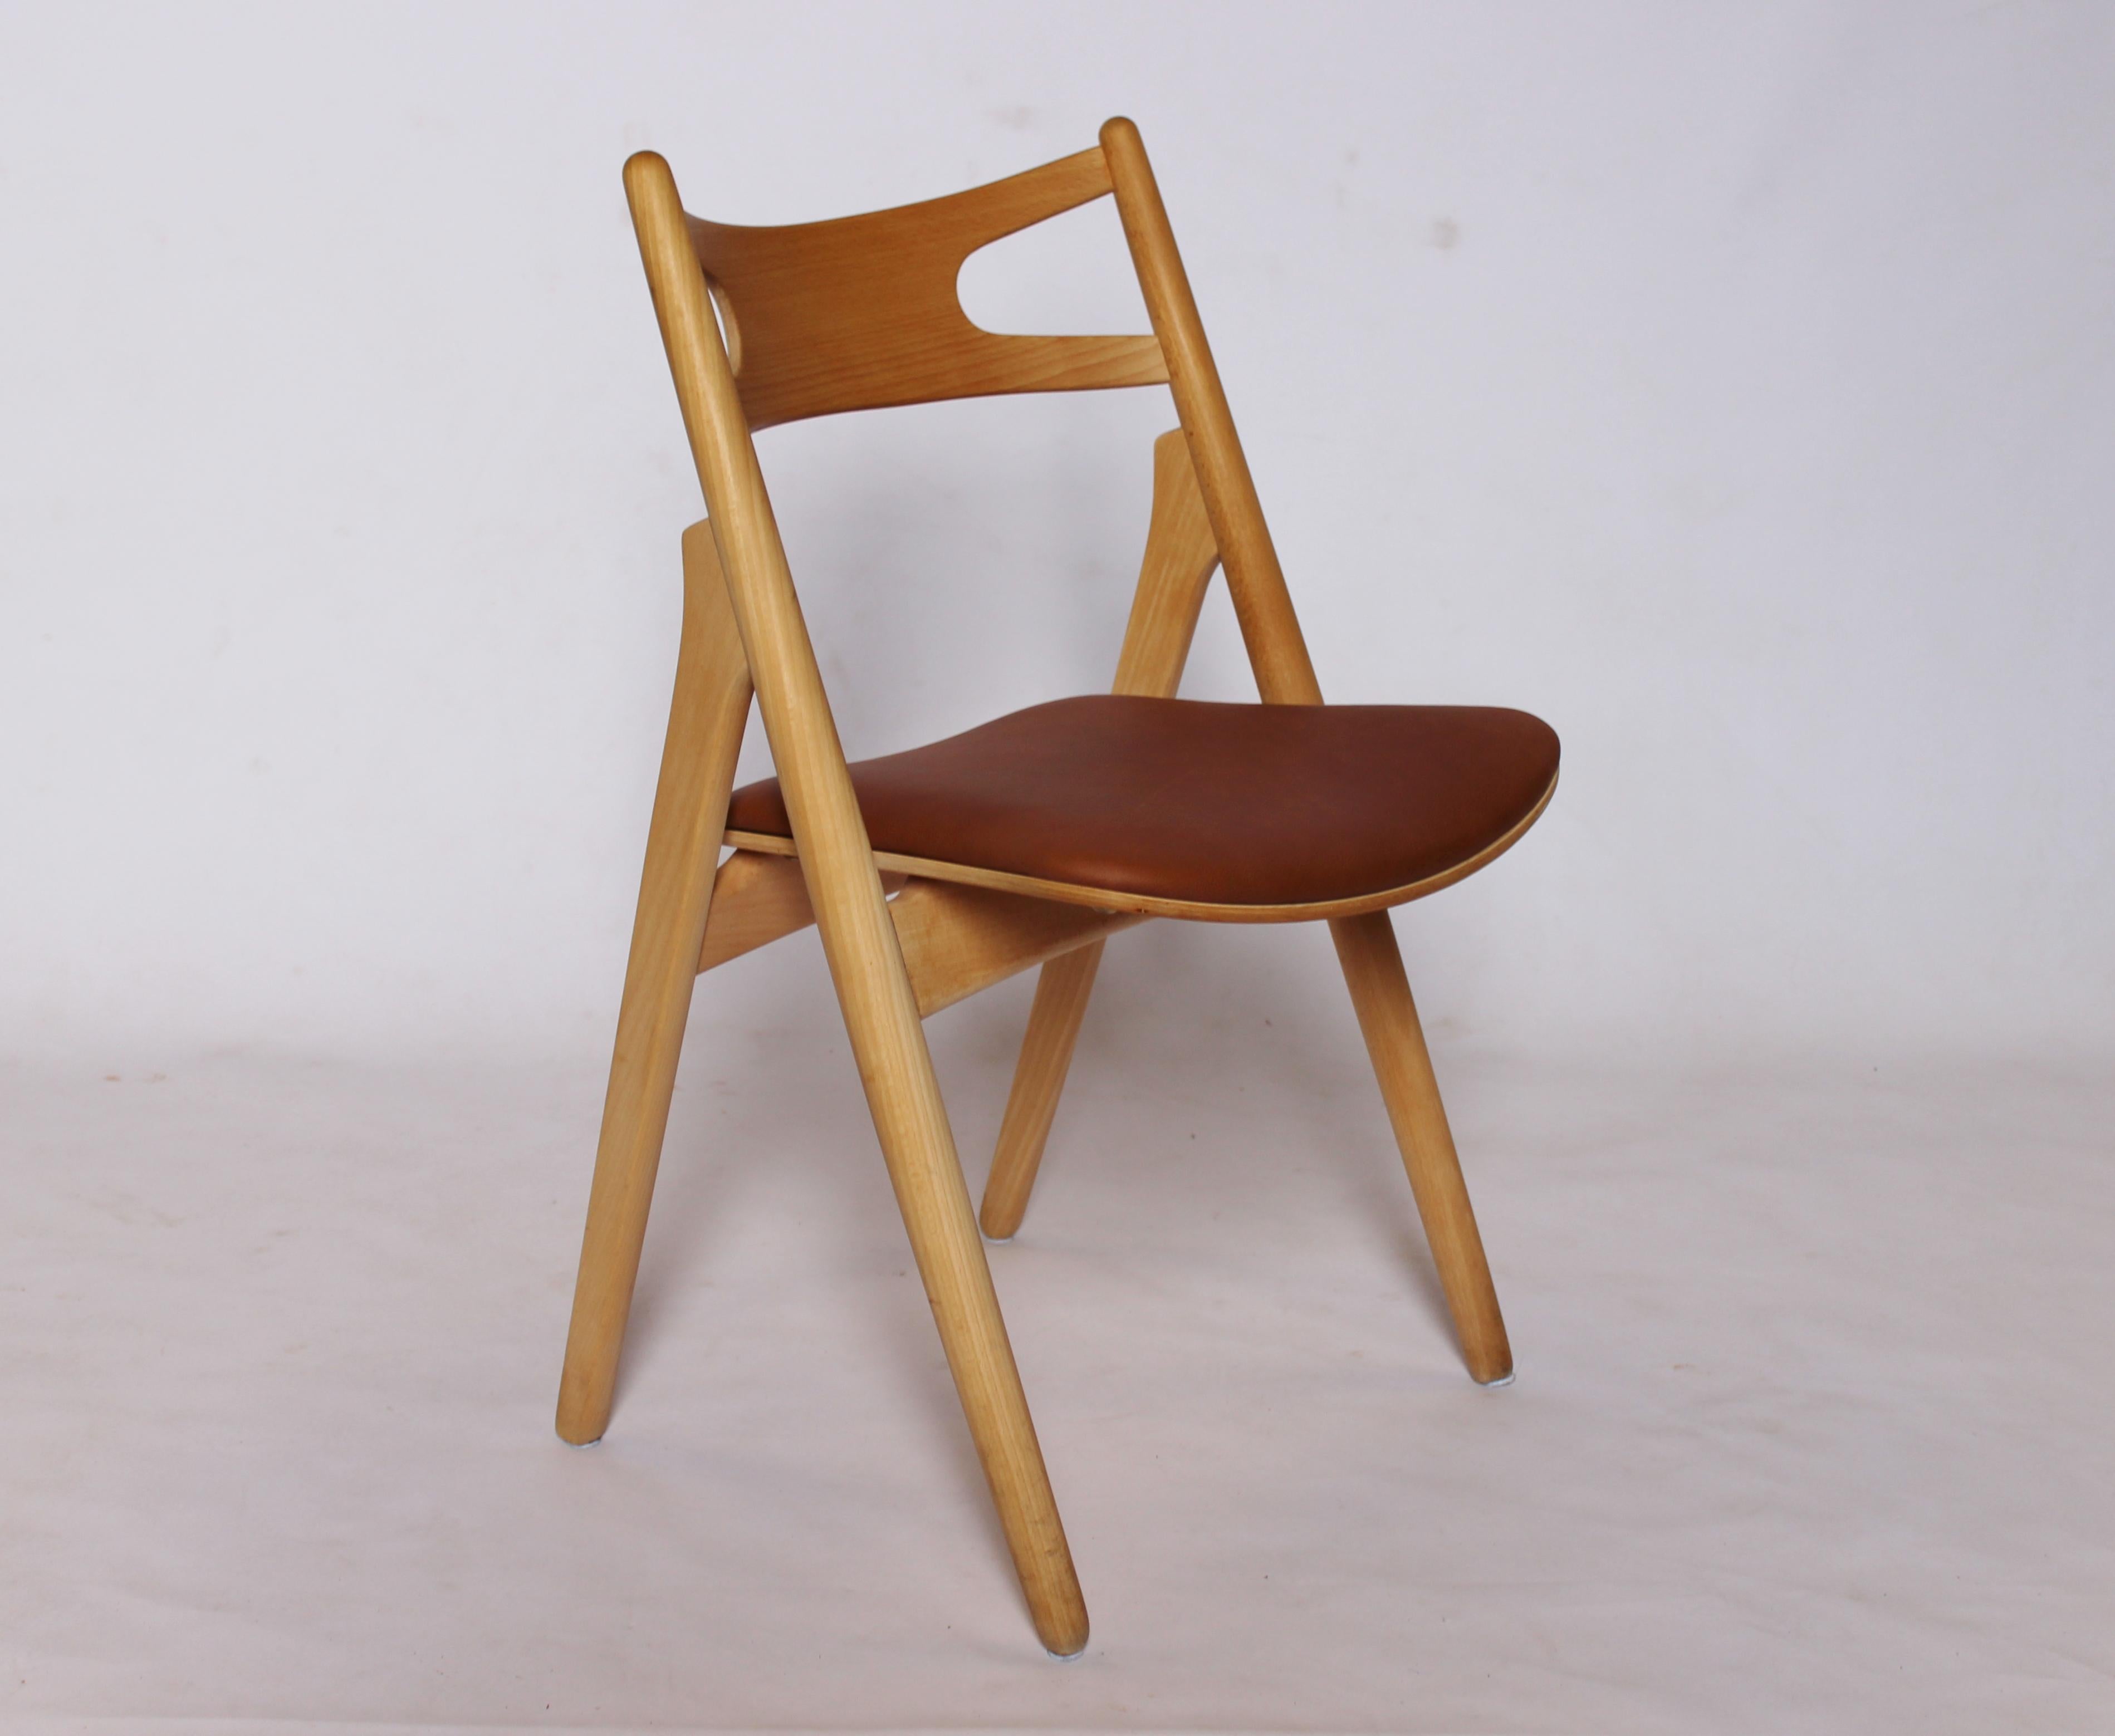 A Sawbuck chair, model CH29, designed by Hans J. Wegner in 1952 and manufactured by Carl Hansen & Son in the 1970s. The chair is made of soap treated beech and with seat of cognac elegance leather.